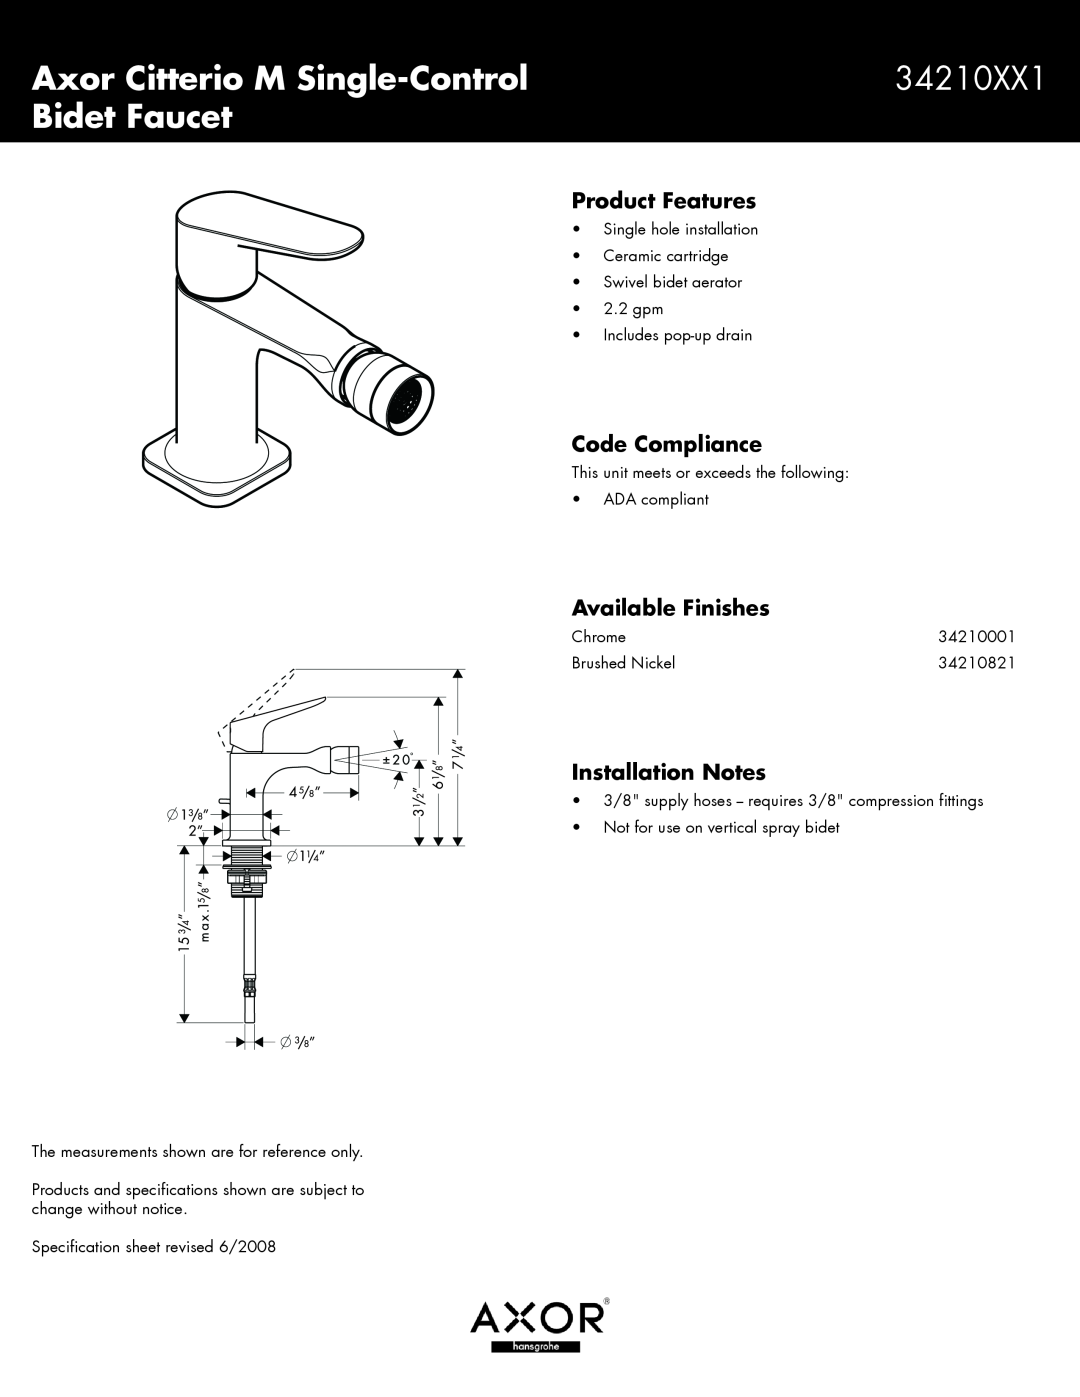 Axor 34210001 specifications Axor Citterio M Single-Control, 34210XX1, Bidet Faucet, Product Features, Code Compliance 